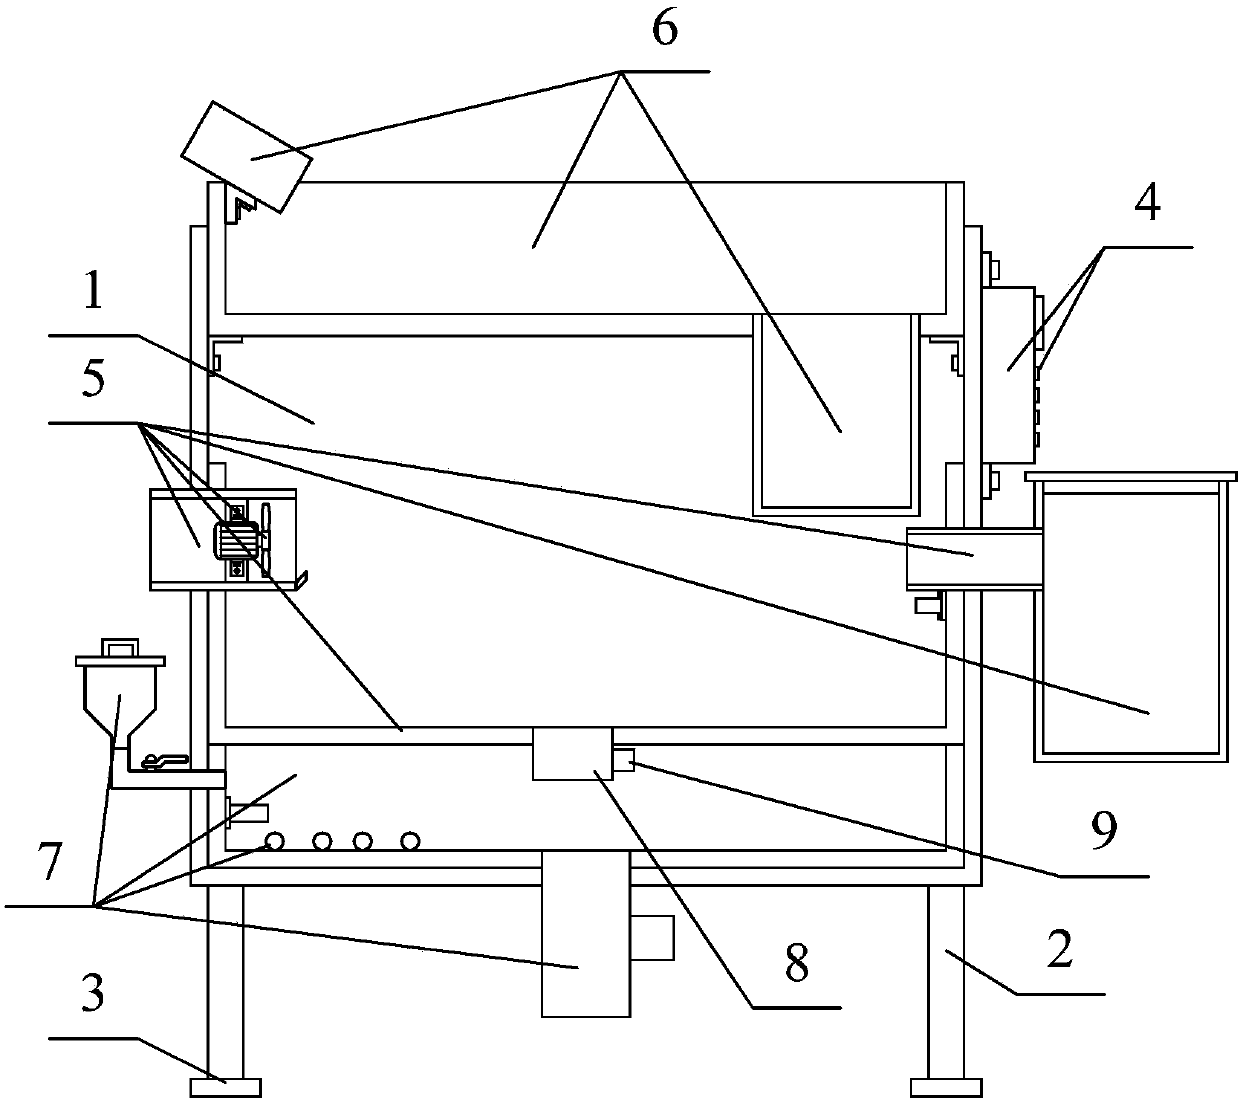 Structure-improved seed clearing device for agricultural planting